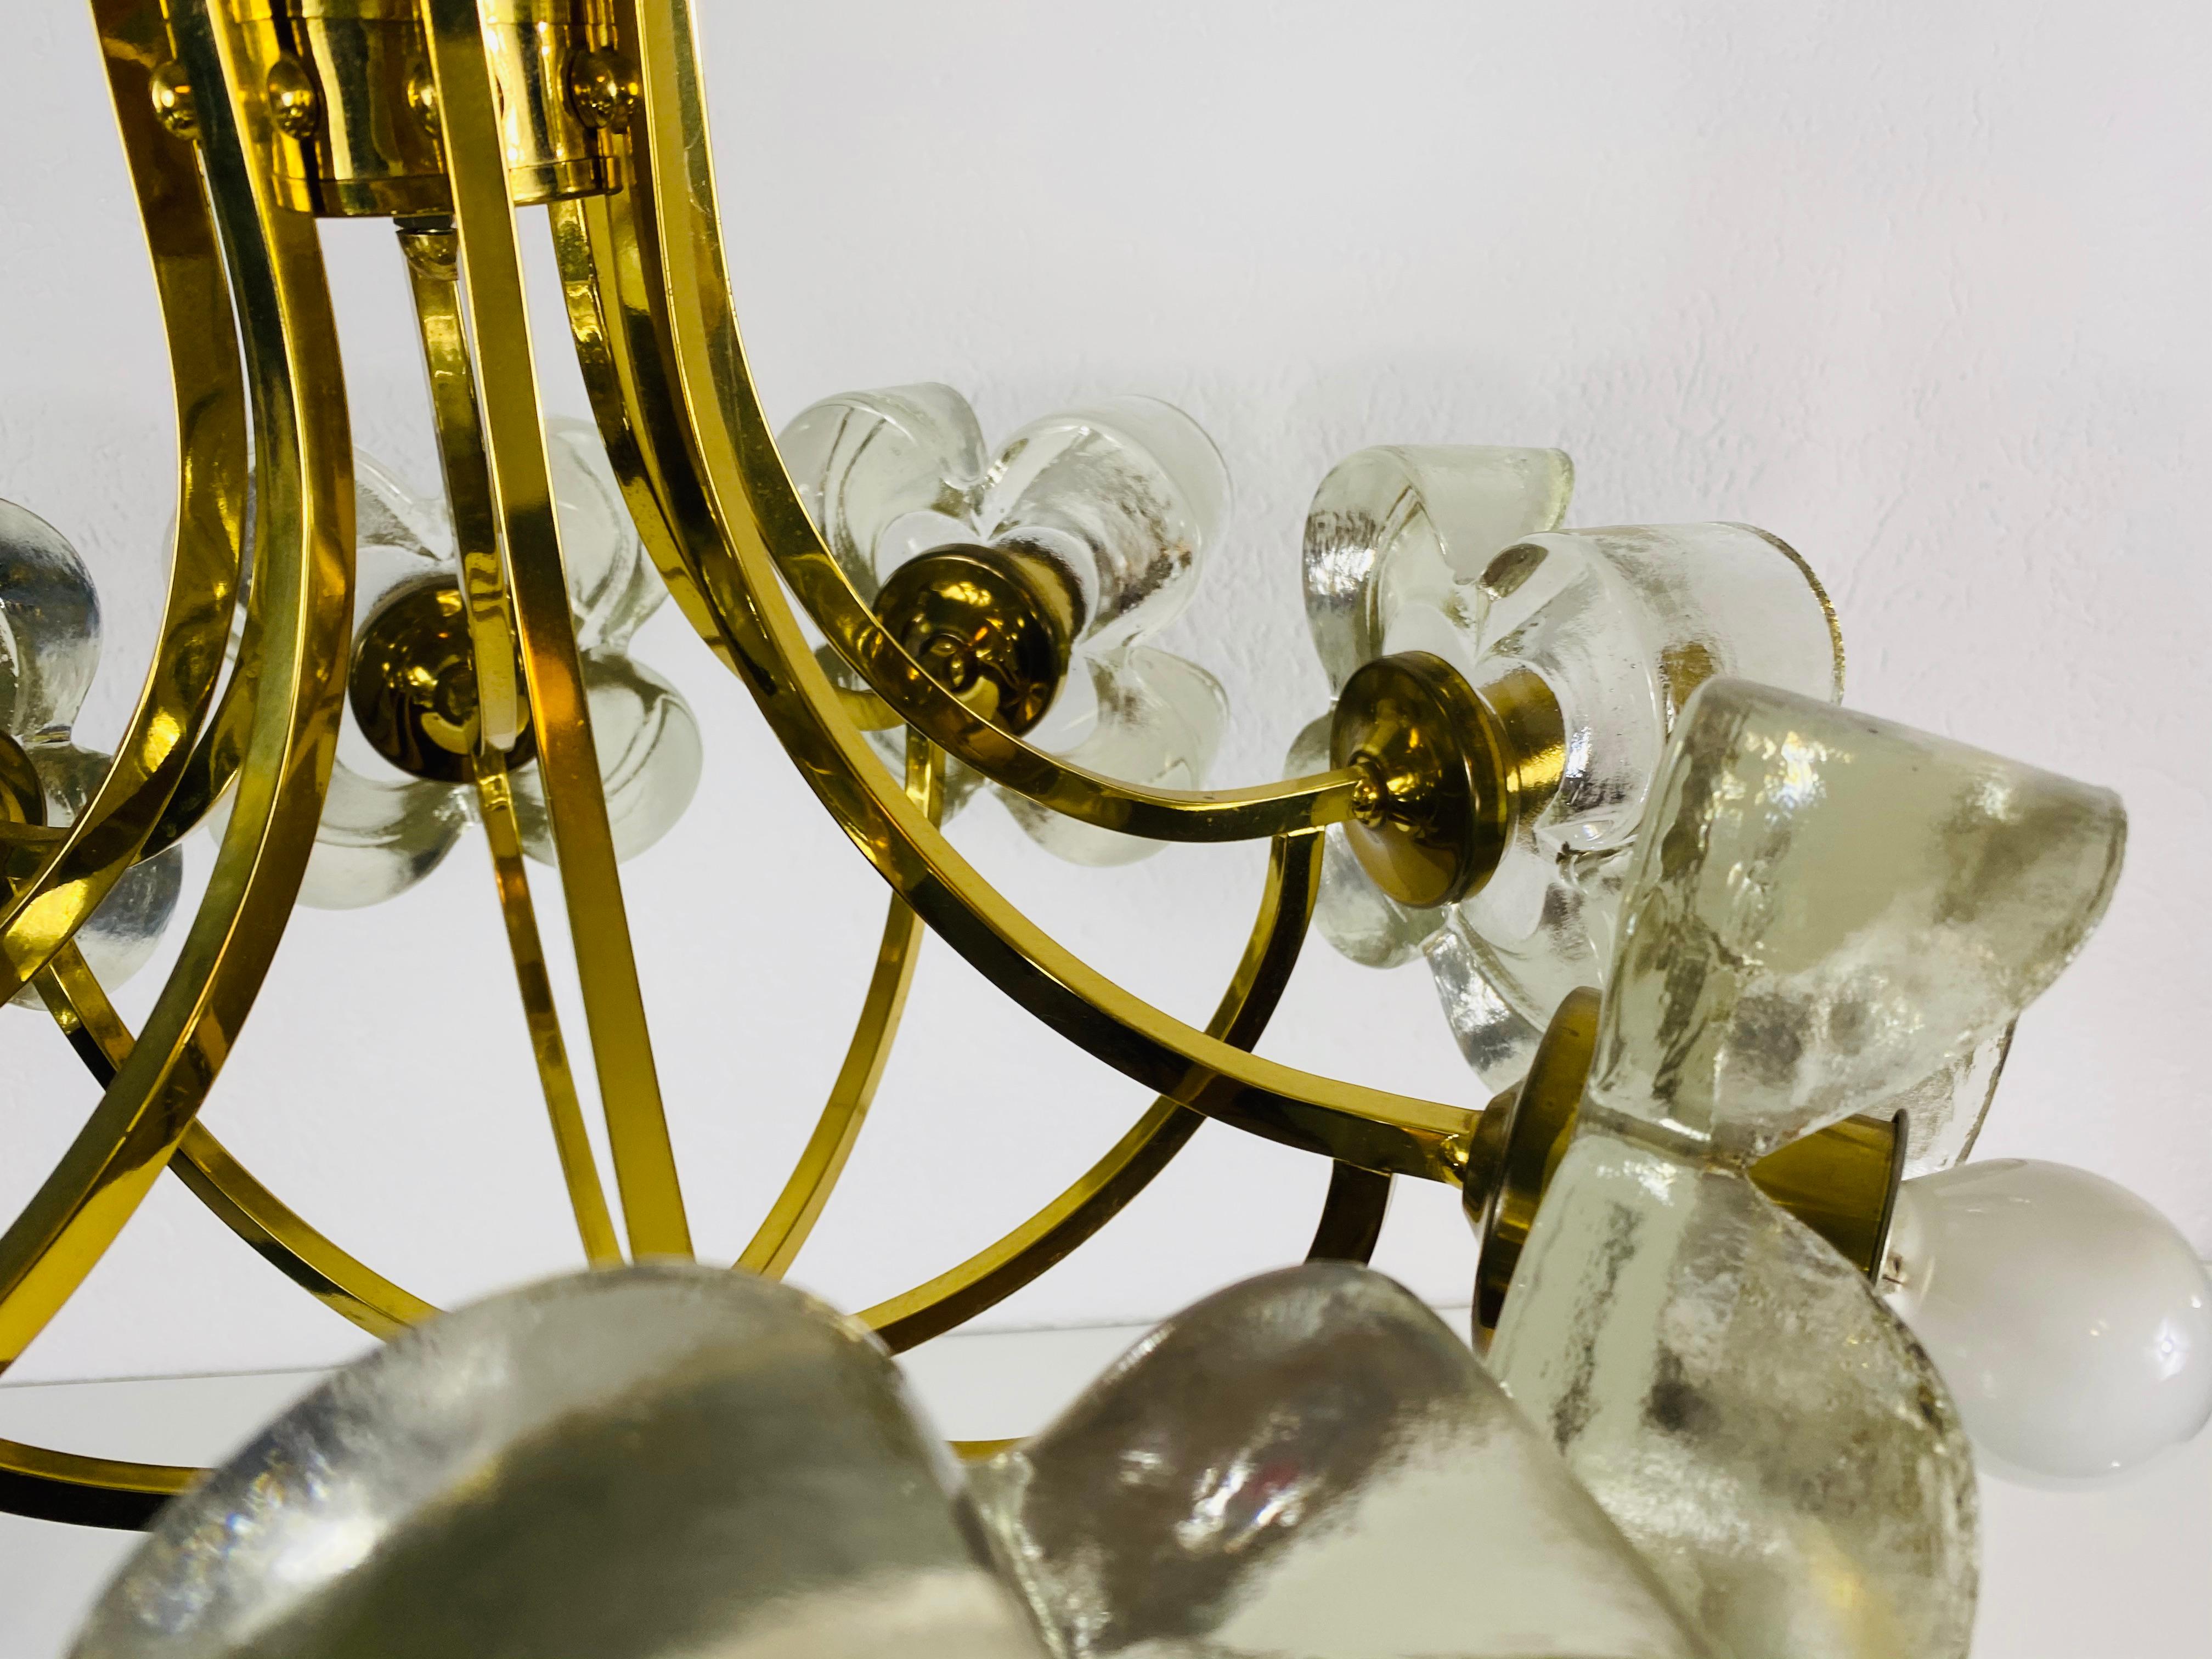 Italian Midcentury Glass and Brass 8-Arm Chandelier Mazzega Attributed, 1960s For Sale 4